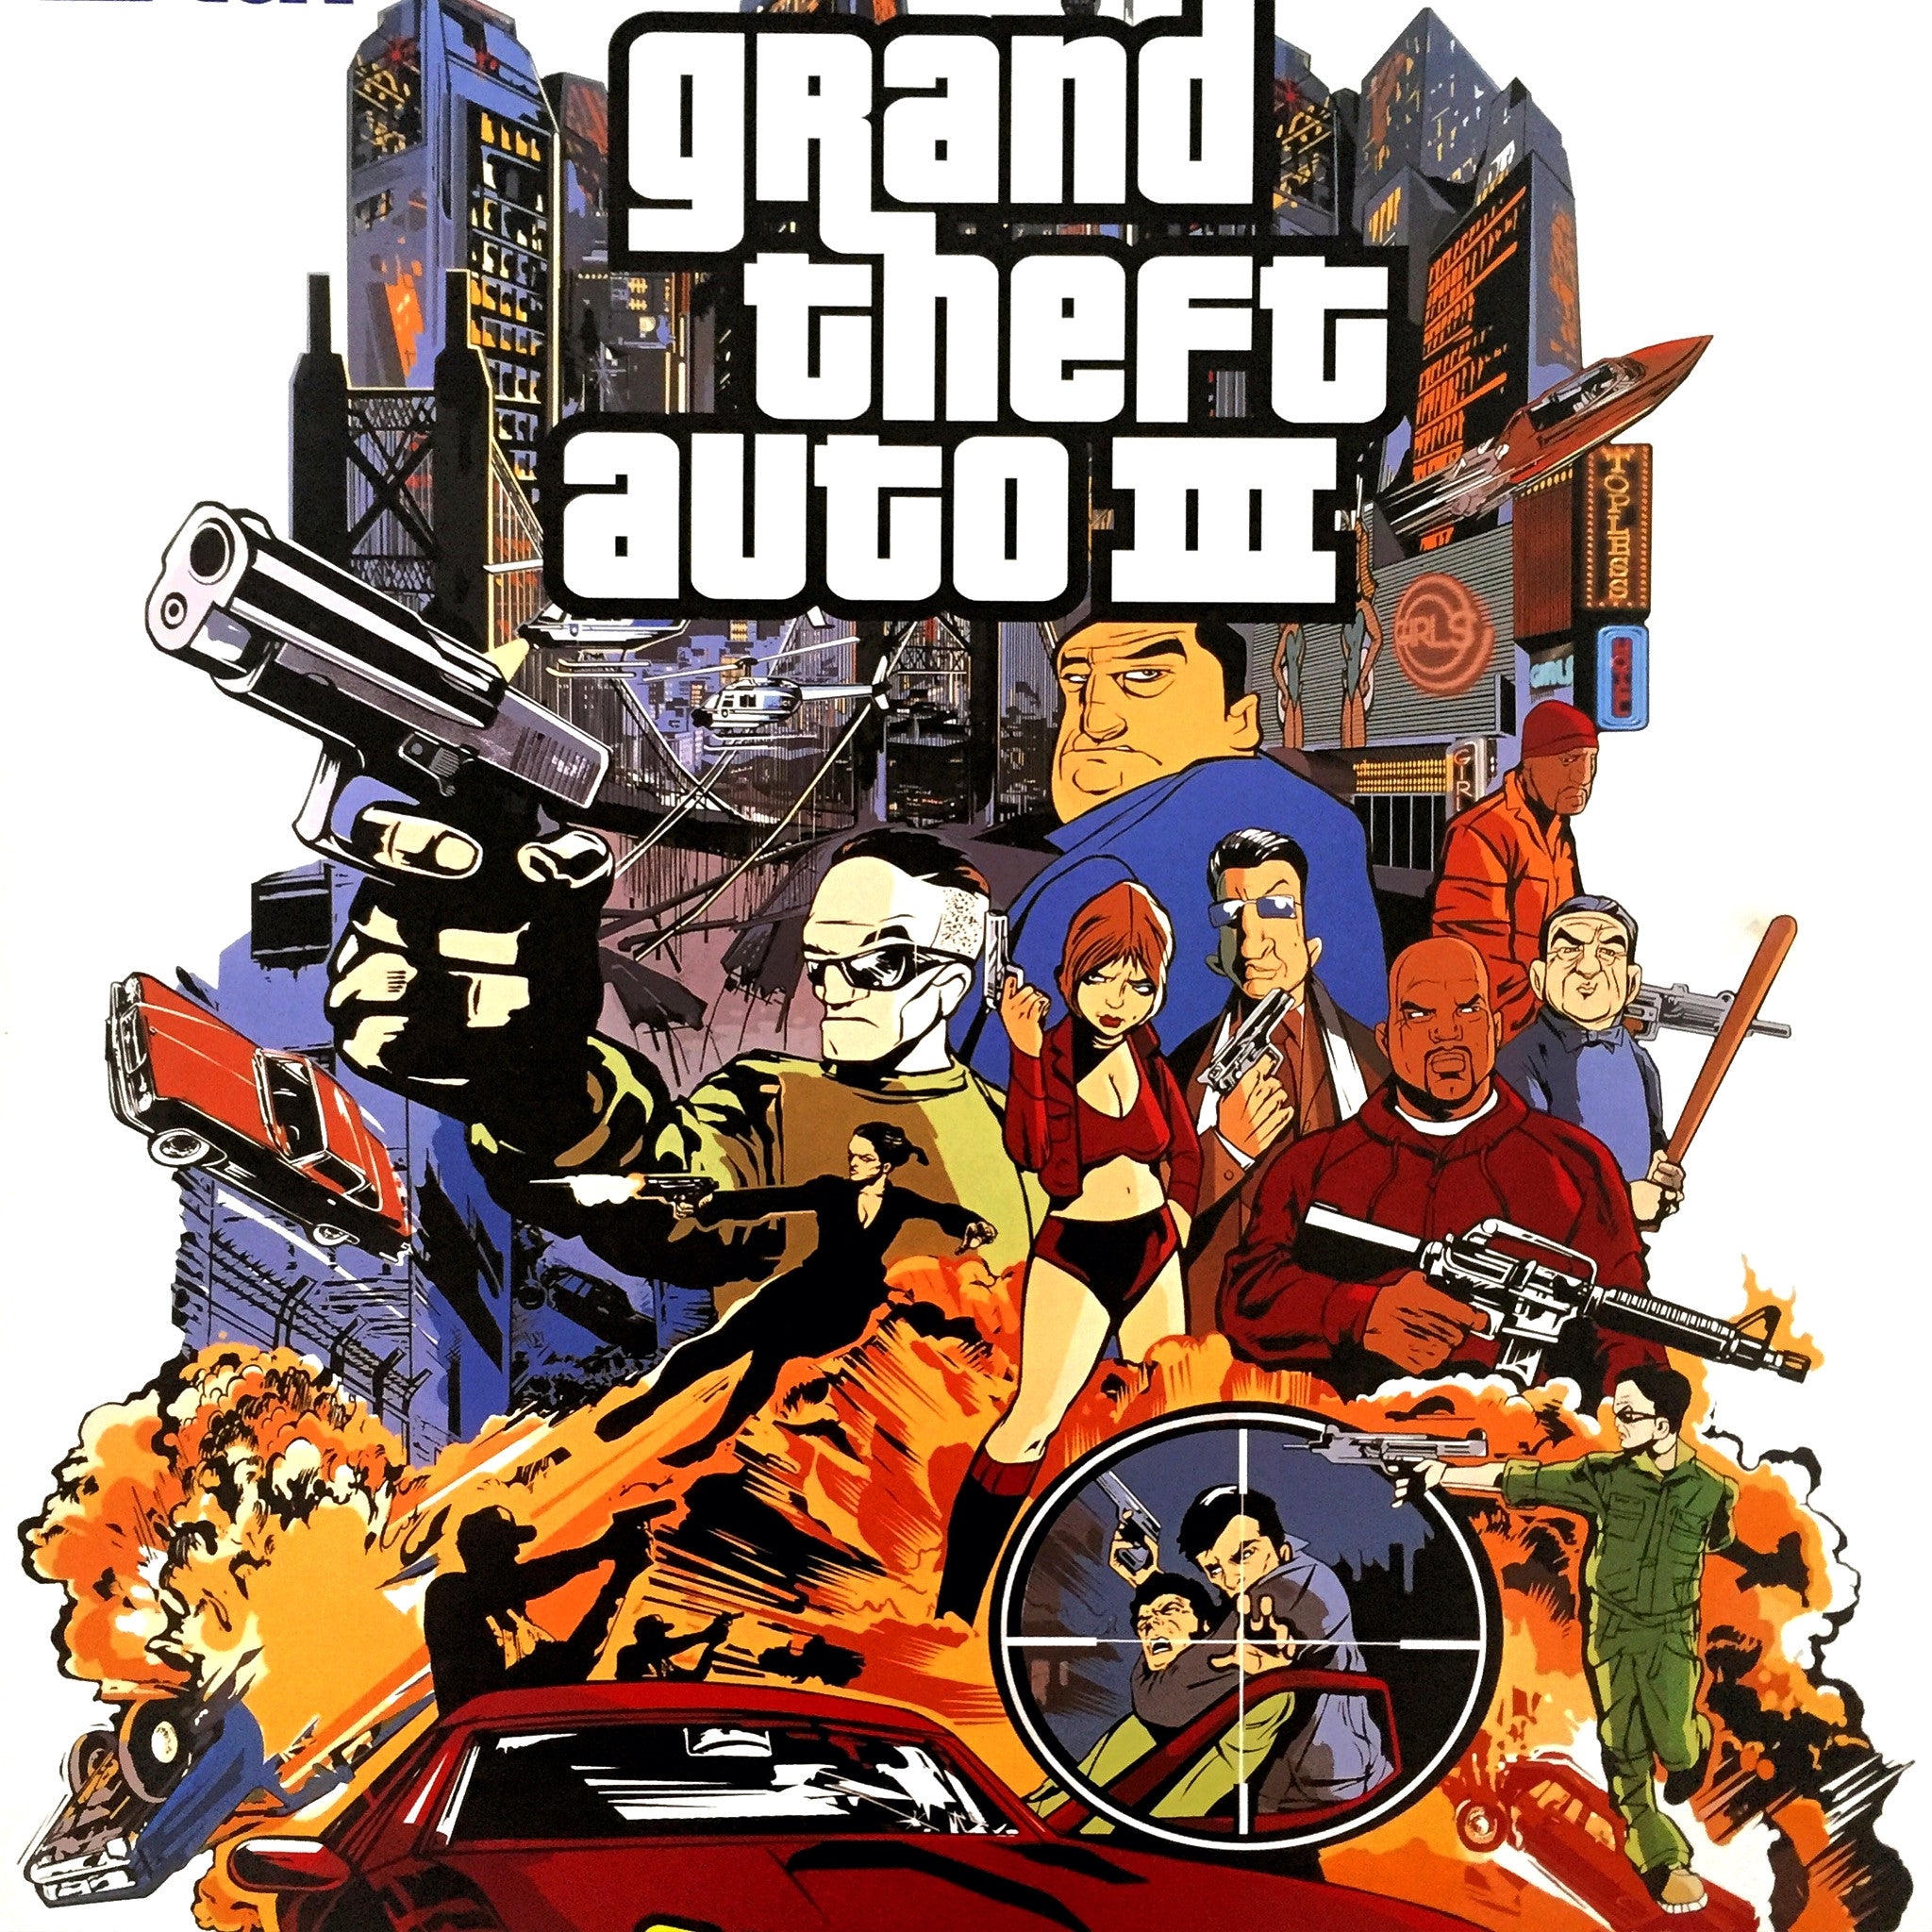 Grand Theft Auto 3 (B2) Japanese Promotional Poster